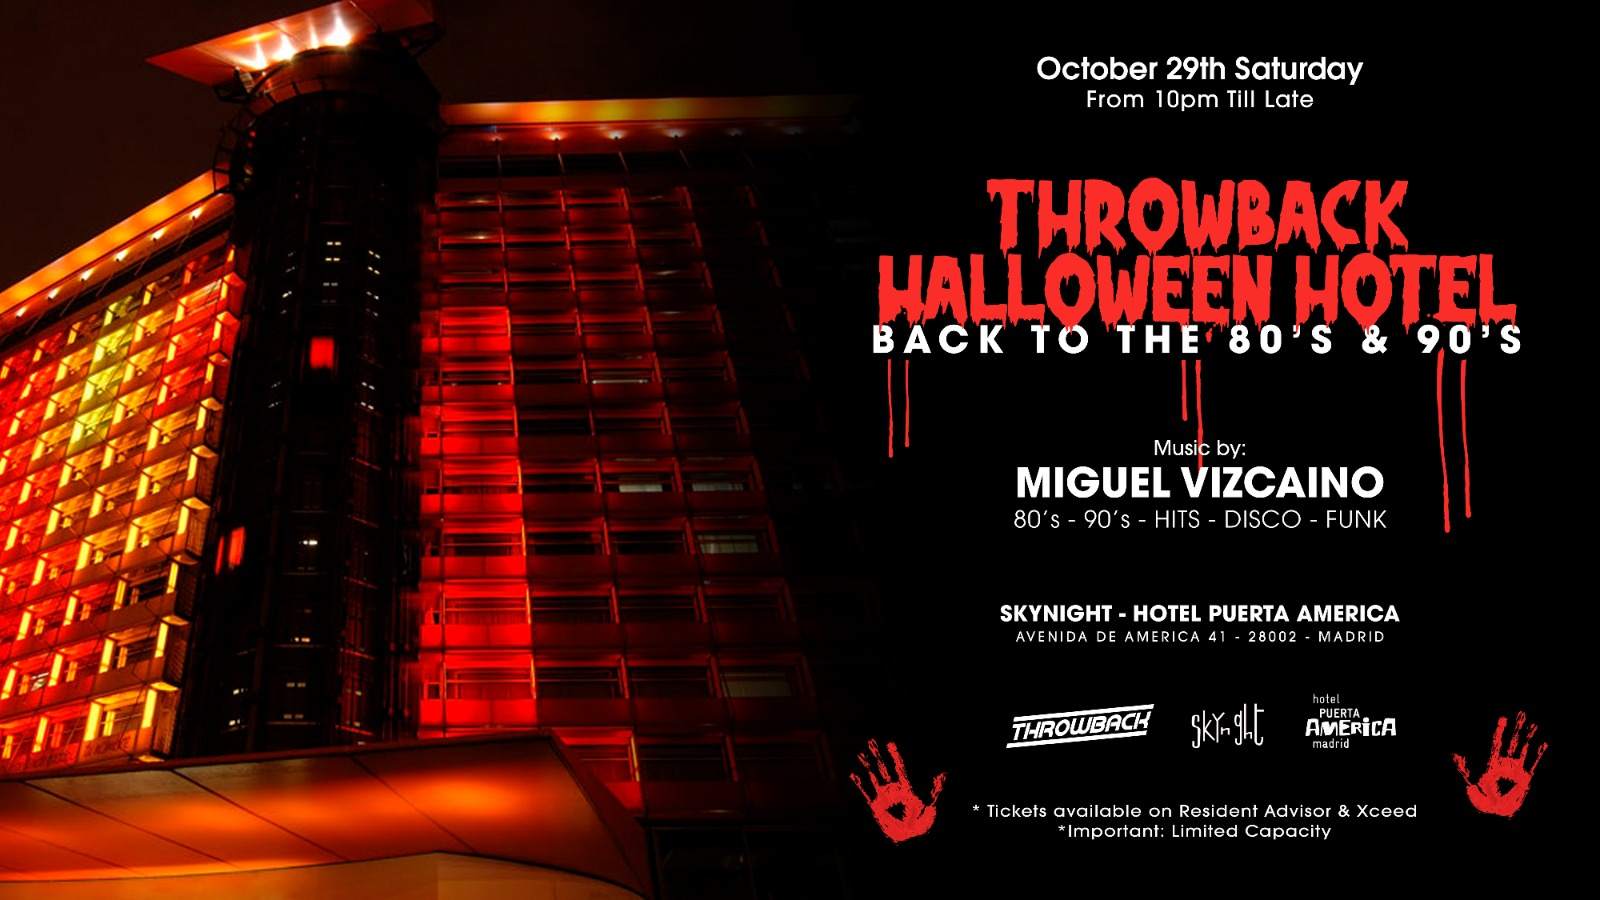 Throwback Hotel Halloween - Back to 80&90' Rooftop Party - フライヤー表